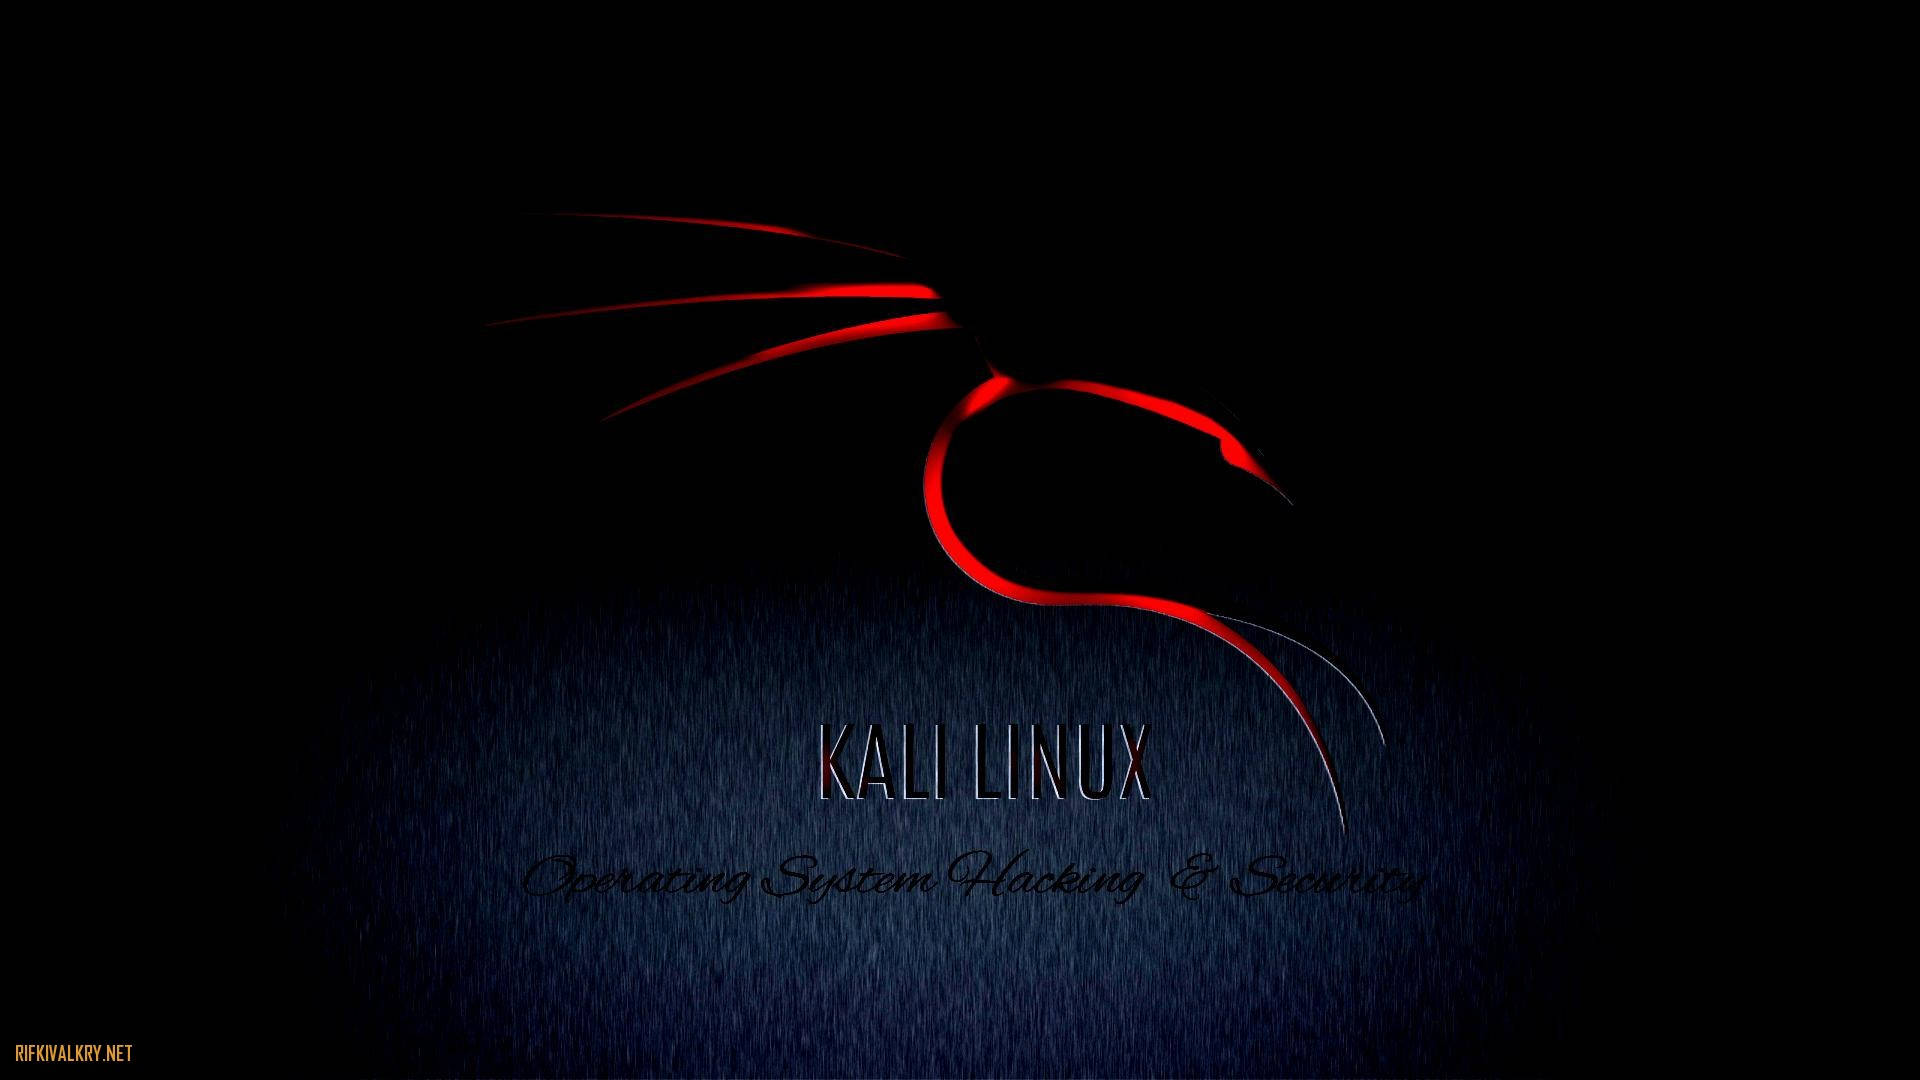 Black And Red Kali Linux Wallpaper